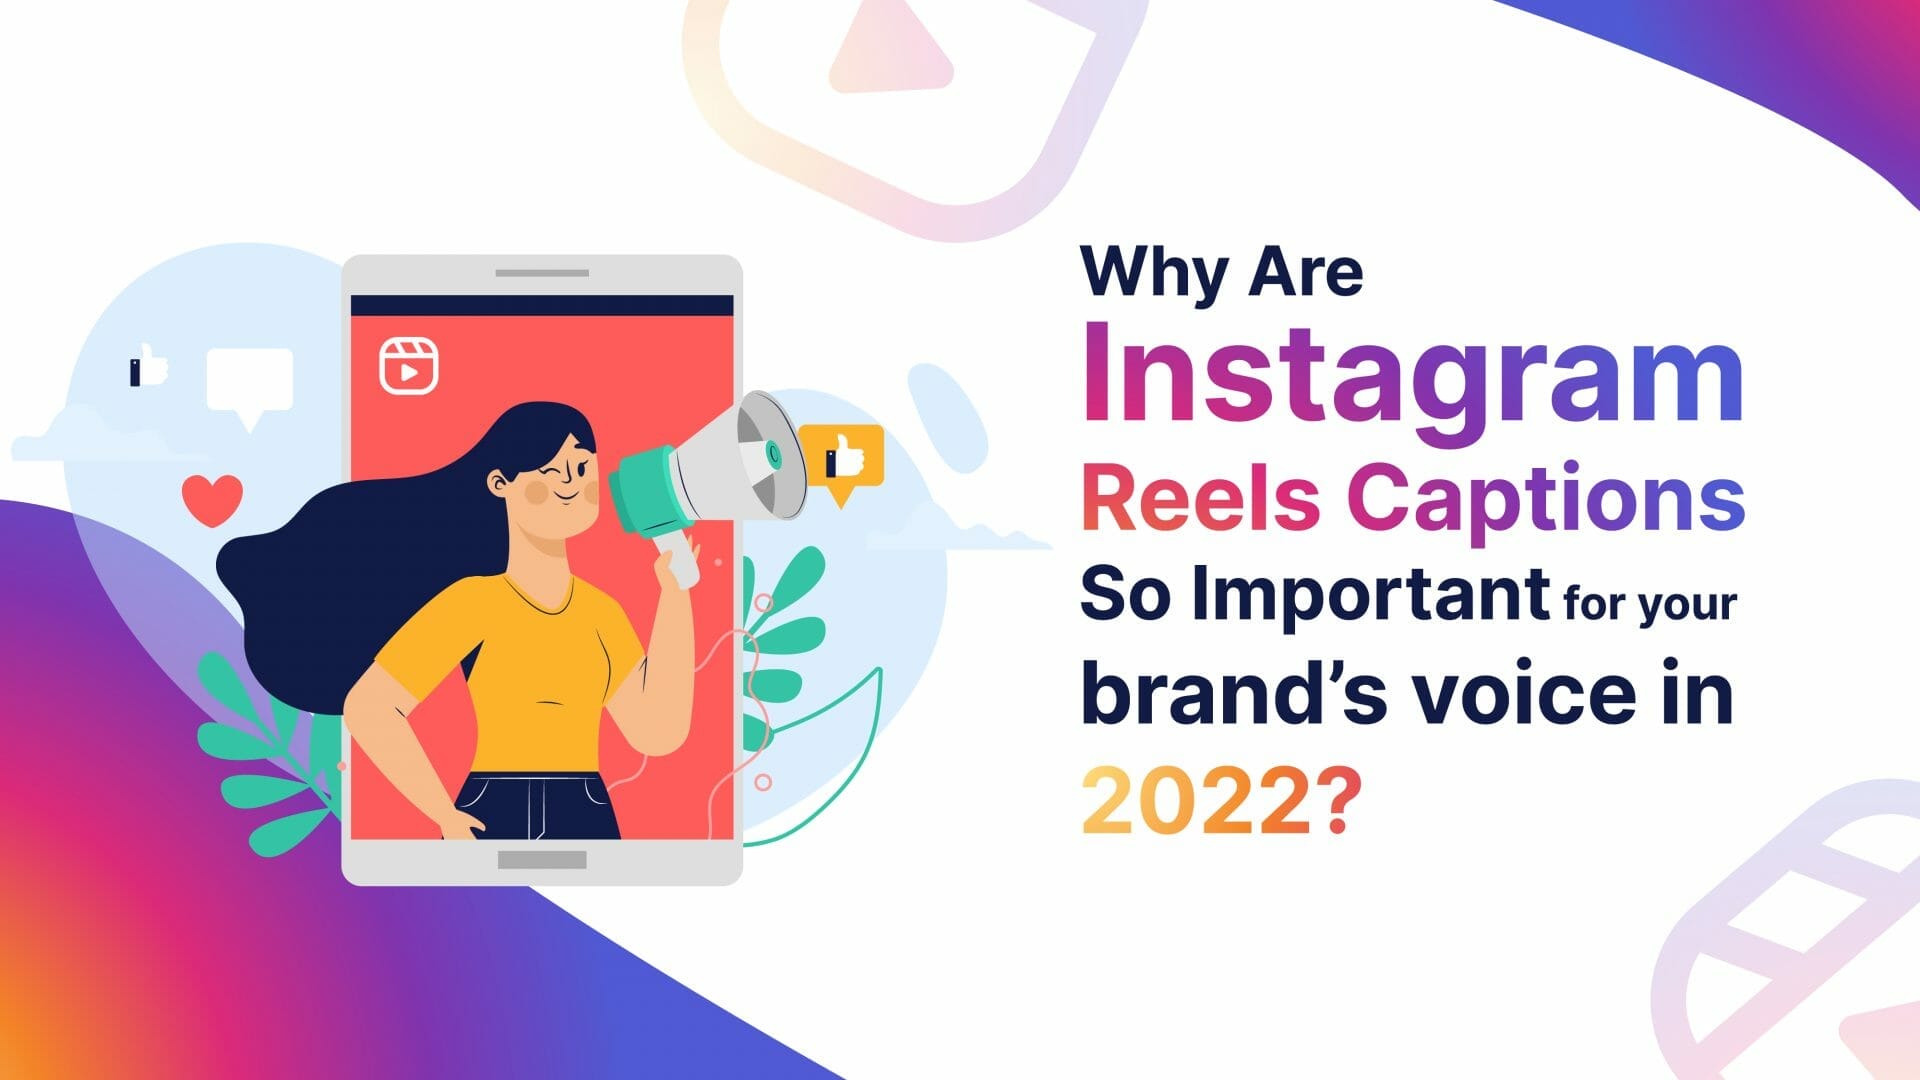 Why Are Instagram Reels Captions So Important for your brand’s voice in 2022?